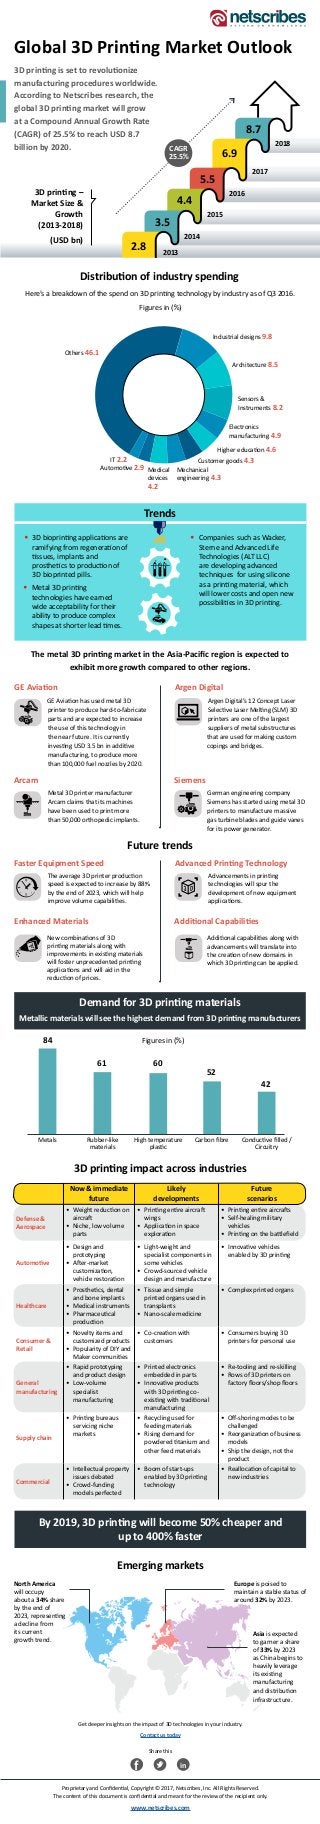 Global 3D Printing Market Outlook
3D printing is set to revolutionize
manufacturing procedures worldwide.
According to Netscribes research, the
global 3D printing market will grow
at a Compound Annual Growth Rate
(CAGR) of 25.5% to reach USD 8.7
billion by 2020.
3D printing –
Market Size &
Growth
(2013-2018)
(USD bn)
2013
2014
2015
2016
2017
2018
2.8
3.5
4.4
5.5
8.7
6.9
Distribution of industry spending
Here’s a breakdown of the spend on 3D printing technology by industry as of Q3 2016.
Others 46.1
Figures in (%)
Industrial designs 9.8
Architecture 8.5
Sensors &
Instruments 8.2
Electronics
manufacturing 4.9
Higher education 4.6
Customer goods 4.3
Mechanical
engineering 4.3
Medical
devices
4.2
Automotive 2.9
IT 2.2
•	 3D bioprinting applications are 	
	 ramifying from regeneration of 	
	 tissues, implants and 		
	 prosthetics to production of 	
	 3D bioprinted pills.
•	 Companies	 such as Wacker, 	
	 Sterne and Advanced Life 		
	 Technologies (ALT LLC) 		
	 are developing advanced 		
	 techniques 	for using silicone 	
	 as a printing material, which 	
	 will lower costs and open new 	
	 possibilities in 3D printing.
Future trends
The average 3D printer production
speed is expected to increase by 88%
by the end of 2023, which will help
improve volume capabilities.
New combinations of 3D
printing materials along with
improvements in existing materials
will foster unprecedented printing
applications and will aid in the
reduction of prices.
Advancements in printing
technologies will spur the
development of new equipment
applications.
Additional capabilities along with
advancements will translate into
the creation of new domains in
which 3D printing can be applied.
Faster Equipment Speed
Enhanced Materials
Advanced Printing Technology
Additional Capabilities
By 2019, 3D printing will become 50% cheaper and
up to 400% faster
Emerging markets
North America
will occupy
about a 34% share
by the end of
2023, representing
a decline from
its current
growth trend.
Get deeper insights on the impact of 3D technologies in your industry.
Contact us today
Share this
Proprietary and Confidential, Copyright © 2017, Netscribes, Inc. All Rights Reserved.
The content of this document is confidential and meant for the review of the recipient only.
www.netscribes.com
Trends
•	 Metal 3D printing 			
	 technologies have earned 		
	 wide acceptability for their 	
	 ability to produce complex 	
	 shapes at shorter lead times.
Europe is poised to
maintain a stable status of
around 32% by 2023.
Asia is expected
to garner a share
of 33% by 2023
as China begins to
heavily leverage
its existing
manufacturing
and distribution
infrastructure.
f in
CAGR
25.5%
The metal 3D printing market in the Asia-Pacific region is expected to
exhibit more growth compared to other regions.
Siemens
German engineering company
Siemens has started using metal 3D
printers to manufacture massive
gas turbine blades and guide vanes
for its power generator.
GE Aviation
GE Aviation has used metal 3D
printer to produce hard-to-fabricate
parts and are expected to increase
the use of this technology in
the near future. It is currently
investing USD 3.5 bn in additive
manufacturing, to produce more
than 100,000 fuel nozzles by 2020.
Arcam
Metal 3D printer manufacturer
Arcam claims that its machines
have been used to print more
than 50,000 orthopedic implants.
Argen Digital
Argen Digital’s 12 Concept Laser
Selective Laser Melting (SLM) 3D
printers are one of the largest
suppliers of metal substructures
that are used for making custom
copings and bridges.
Demand for 3D printing materials
Metallic materials will see the highest demand from 3D printing manufacturers
Figures in (%)
Now & immediate
future
Likely
developments
Future
scenarios
Defense &
Aerospace
•	 Weight reduction on
aircraft
•	 Niche, low volume
parts
•	 Printing entire aircraft
wings
•	 Application in space
exploration
•	 Printing entire aircrafts
•	 Self-healing military
vehicles
•	 Printing on the battlefield
Automotive
•	 Design and
prototyping
•	 After-market
customization,
vehicle restoration
•	 Light-weight and
specialist components in
some vehicles
•	 Crowd-sourced vehicle
design and manufacture
•	 Innovative vehicles
enabled by 3D printing
Healthcare
•	 Prosthetics, dental
and bone implants
•	 Medical instruments
•	 Pharmaceutical
production
•	 Tissue and simple
printed organs used in
transplants
•	 Nano-scale medicine
•	 Complex printed organs
Consumer &
Retail
•	 Novelty items and
customized products
•	 Popularity of DIY and
Maker communities
•	 Co-creation with
customers
•	 Consumers buying 3D
printers for personal use
General
manufacturing
•	 Rapid prototyping
and product design
•	 Low-volume
specialist
manufacturing
•	 Printed electronics
embedded in parts
•	 Innovative products
with 3D printing co-
existing with traditional
manufacturing
•	 Re-tooling and re-skilling
•	 Rows of 3D printers on
factory floors/shop floors
Supply chain
•	 Printing bureaus
servicing niche
markets
•	 Recycling used for
feeding materials
•	 Rising demand for
powdered titanium and
other feed materials
•	 Off-shoring modes to be
challenged
•	 Reorganization of business
models
•	 Ship the design, not the
product
Commercial
•	 Intellectual property
issues debated
•	 Crowd-funding
models perfected
•	 Boom of start-ups
enabled by 3D printing
technology
•	 Reallocation of capital to
new industries
3D printing impact across industries
60
52
42
61
84
Metals Rubber-like
materials
High temperature
plastic
Carbon fibre Conductive filled /
Circuitry
 